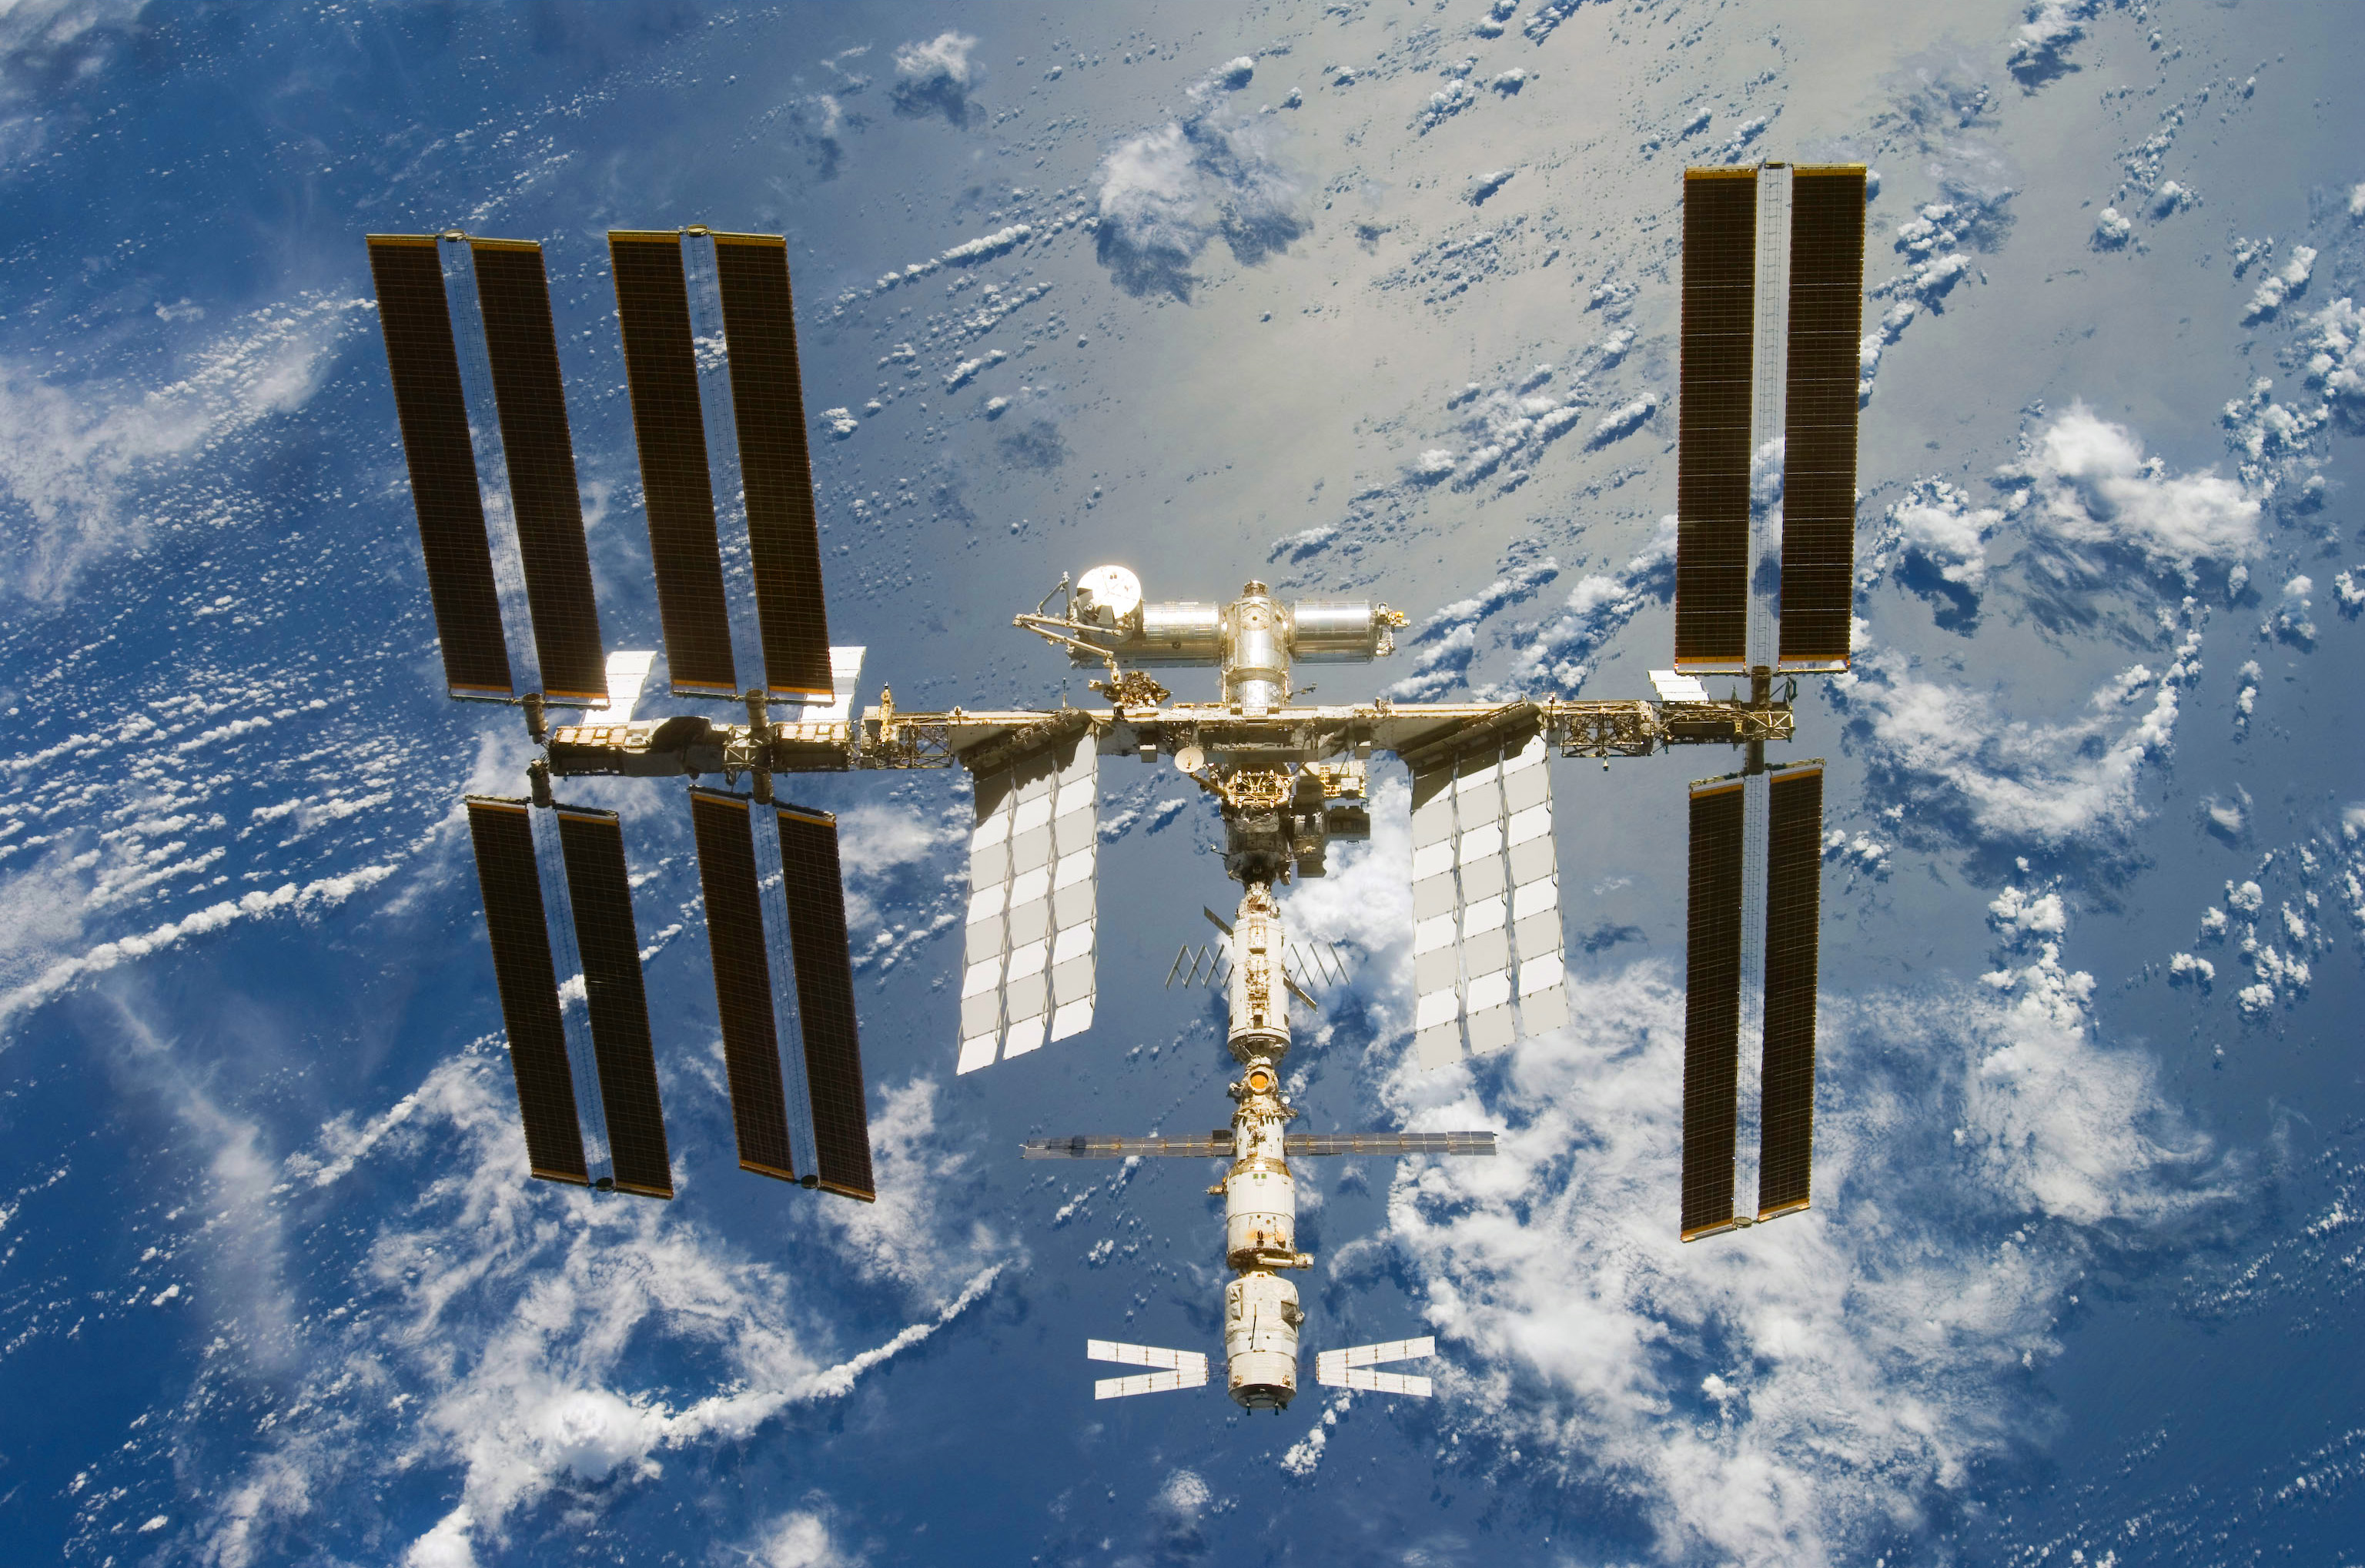 The_International_Space_Station_seen_from_Space_Shuttle_Discovery_after_the_STS-124_mission.jpg